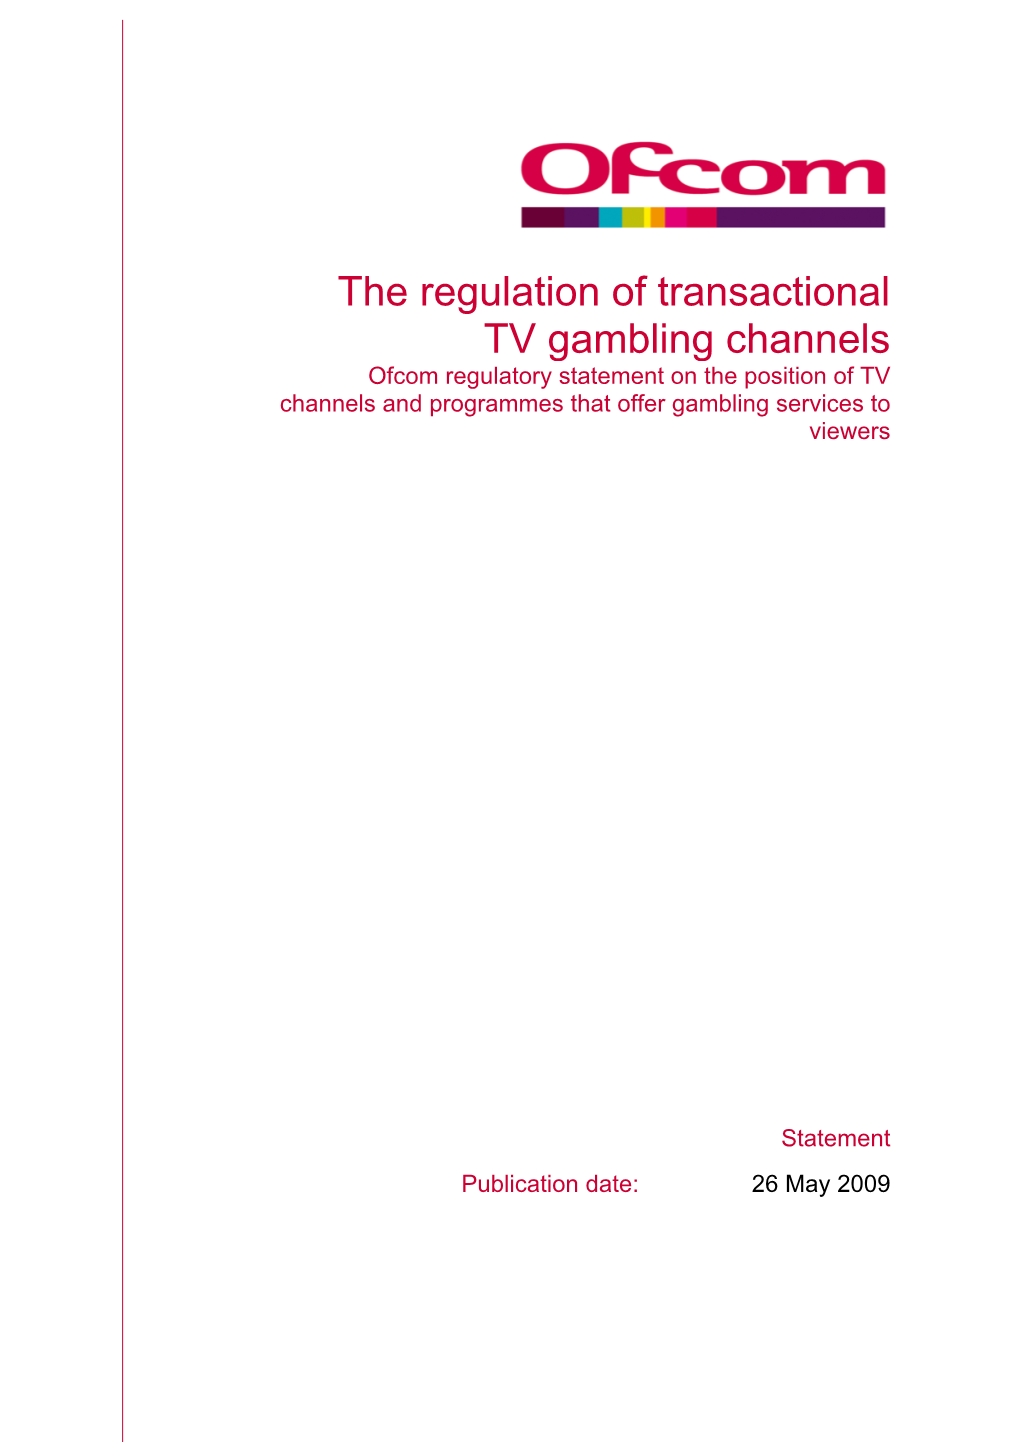 The Regulation of Transactional TV Gambling Channels Ofcom Regulatory Statement on the Position of TV Channels and Programmes That Offer Gambling Services to Viewers